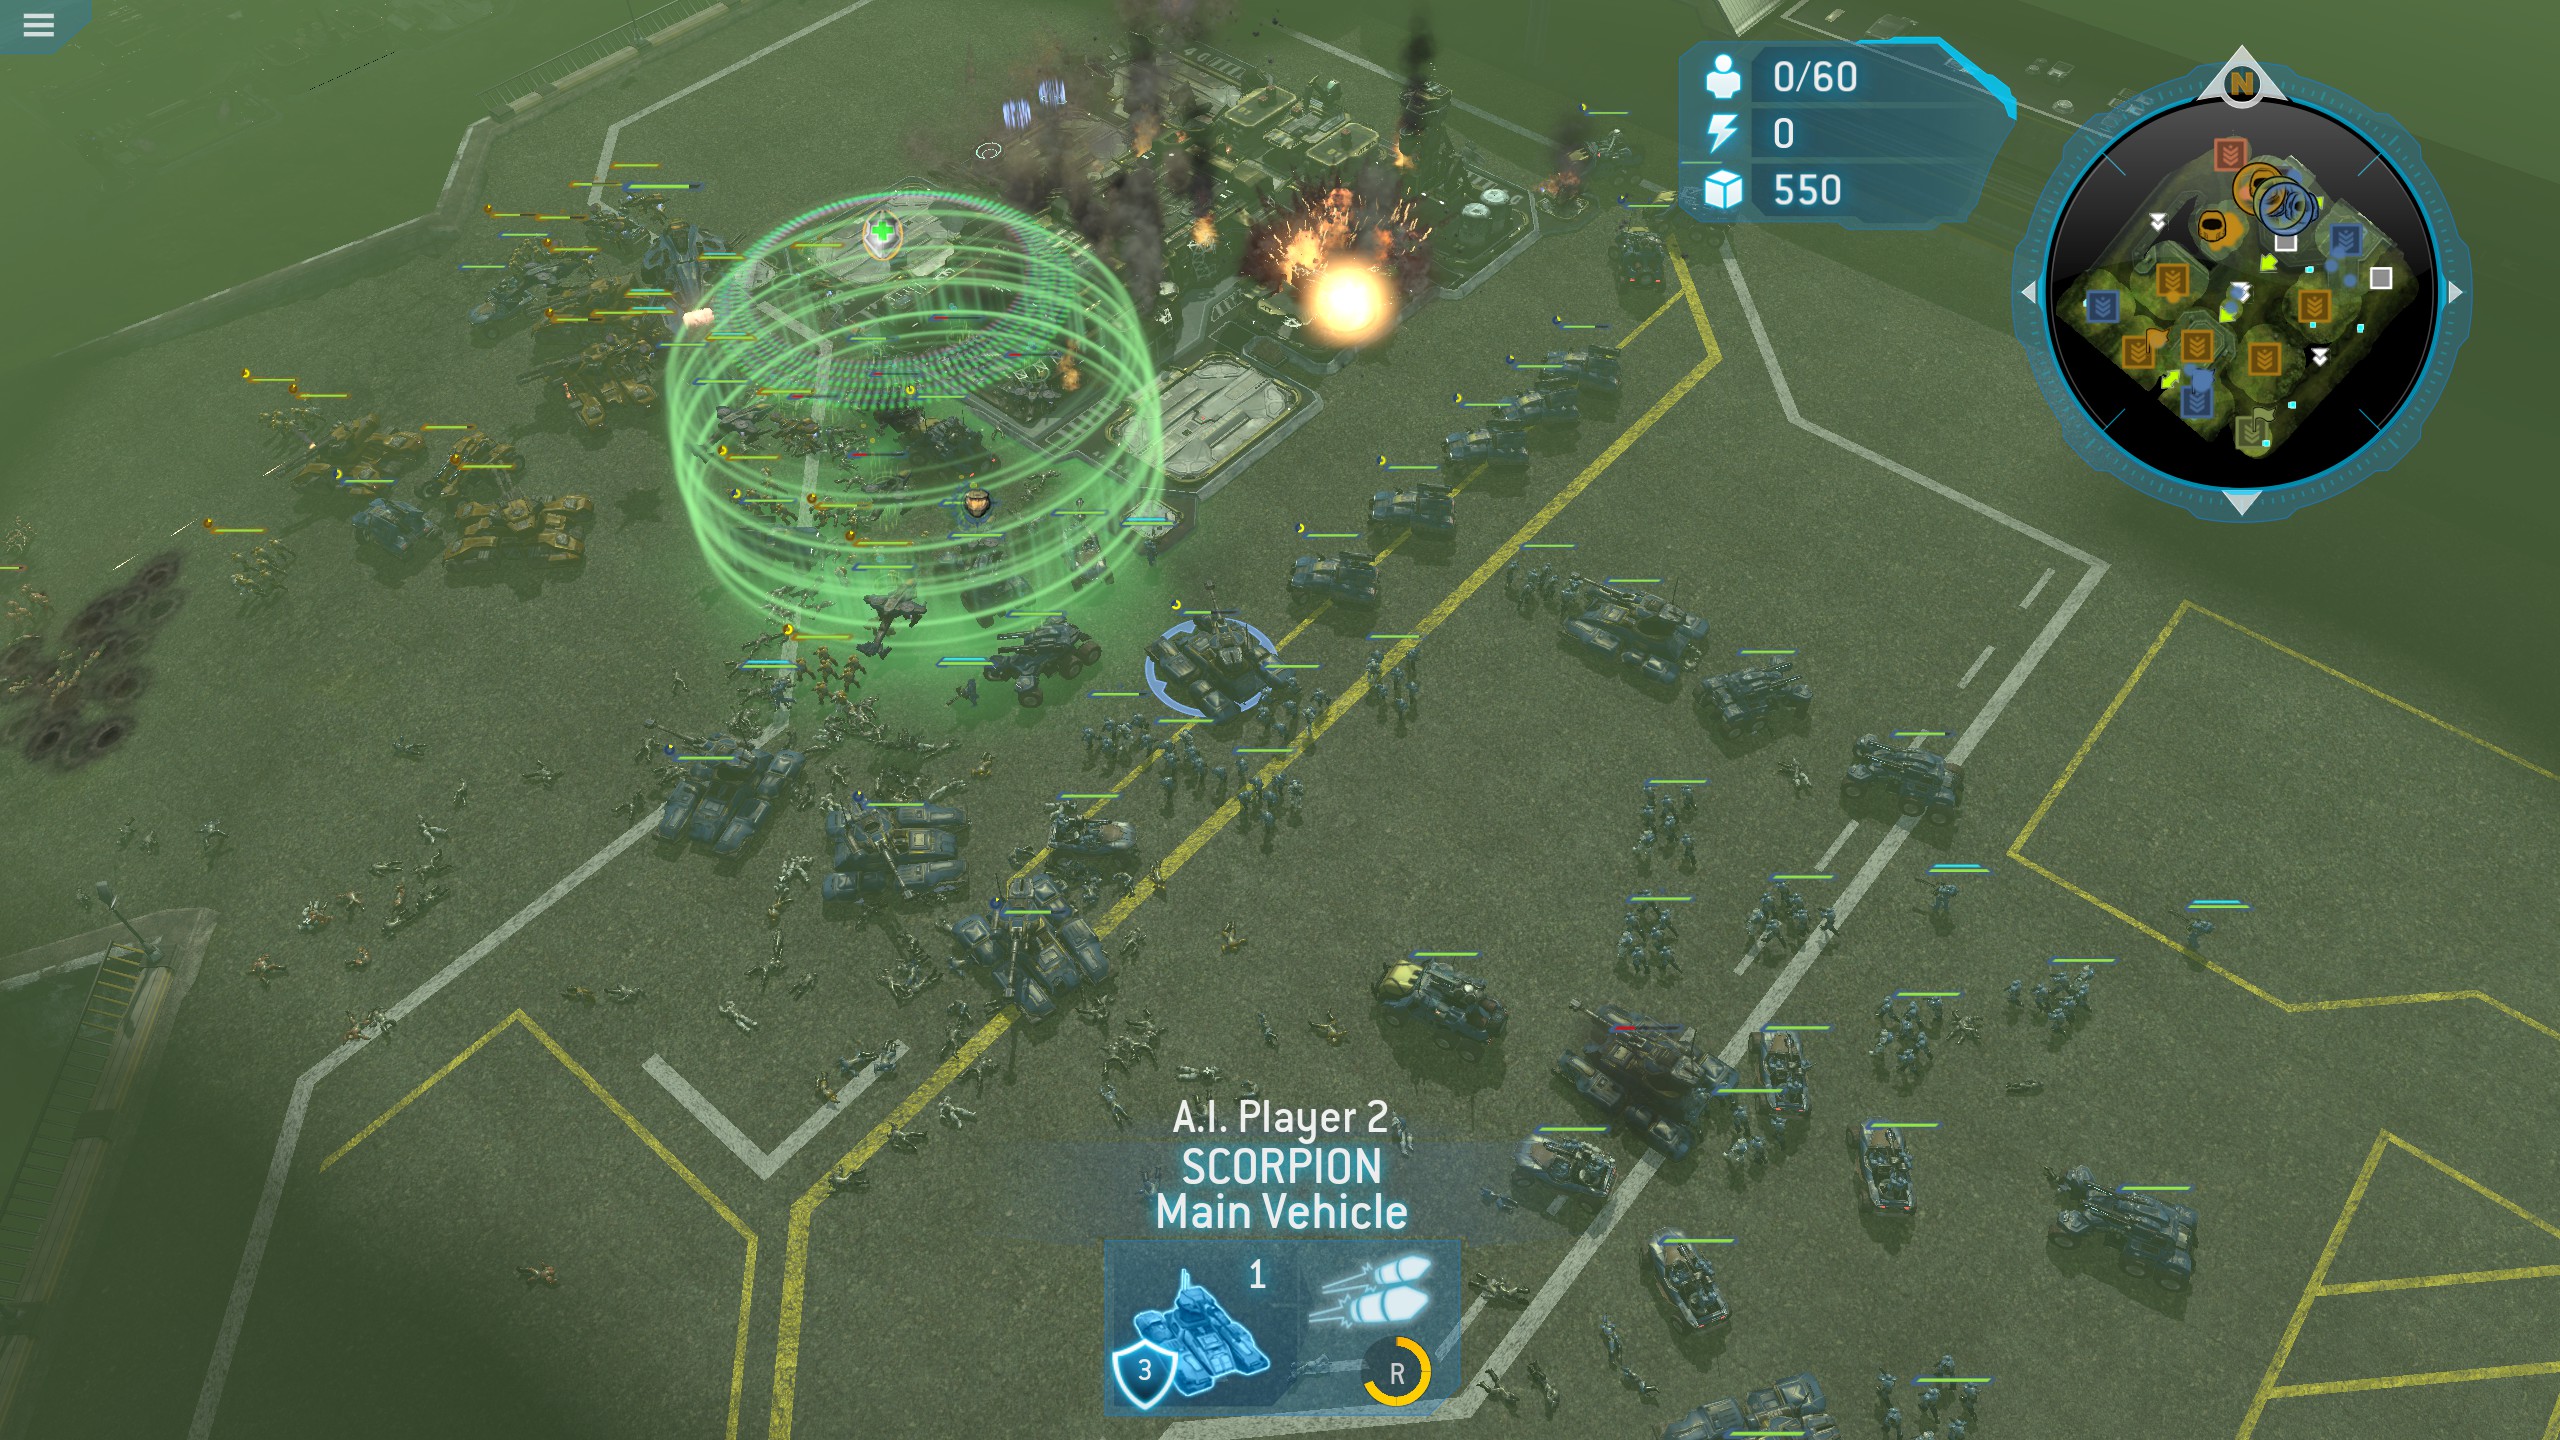 Halo Wars: Definitive Edition - Hardcore Mod Guide and Tips in 2021